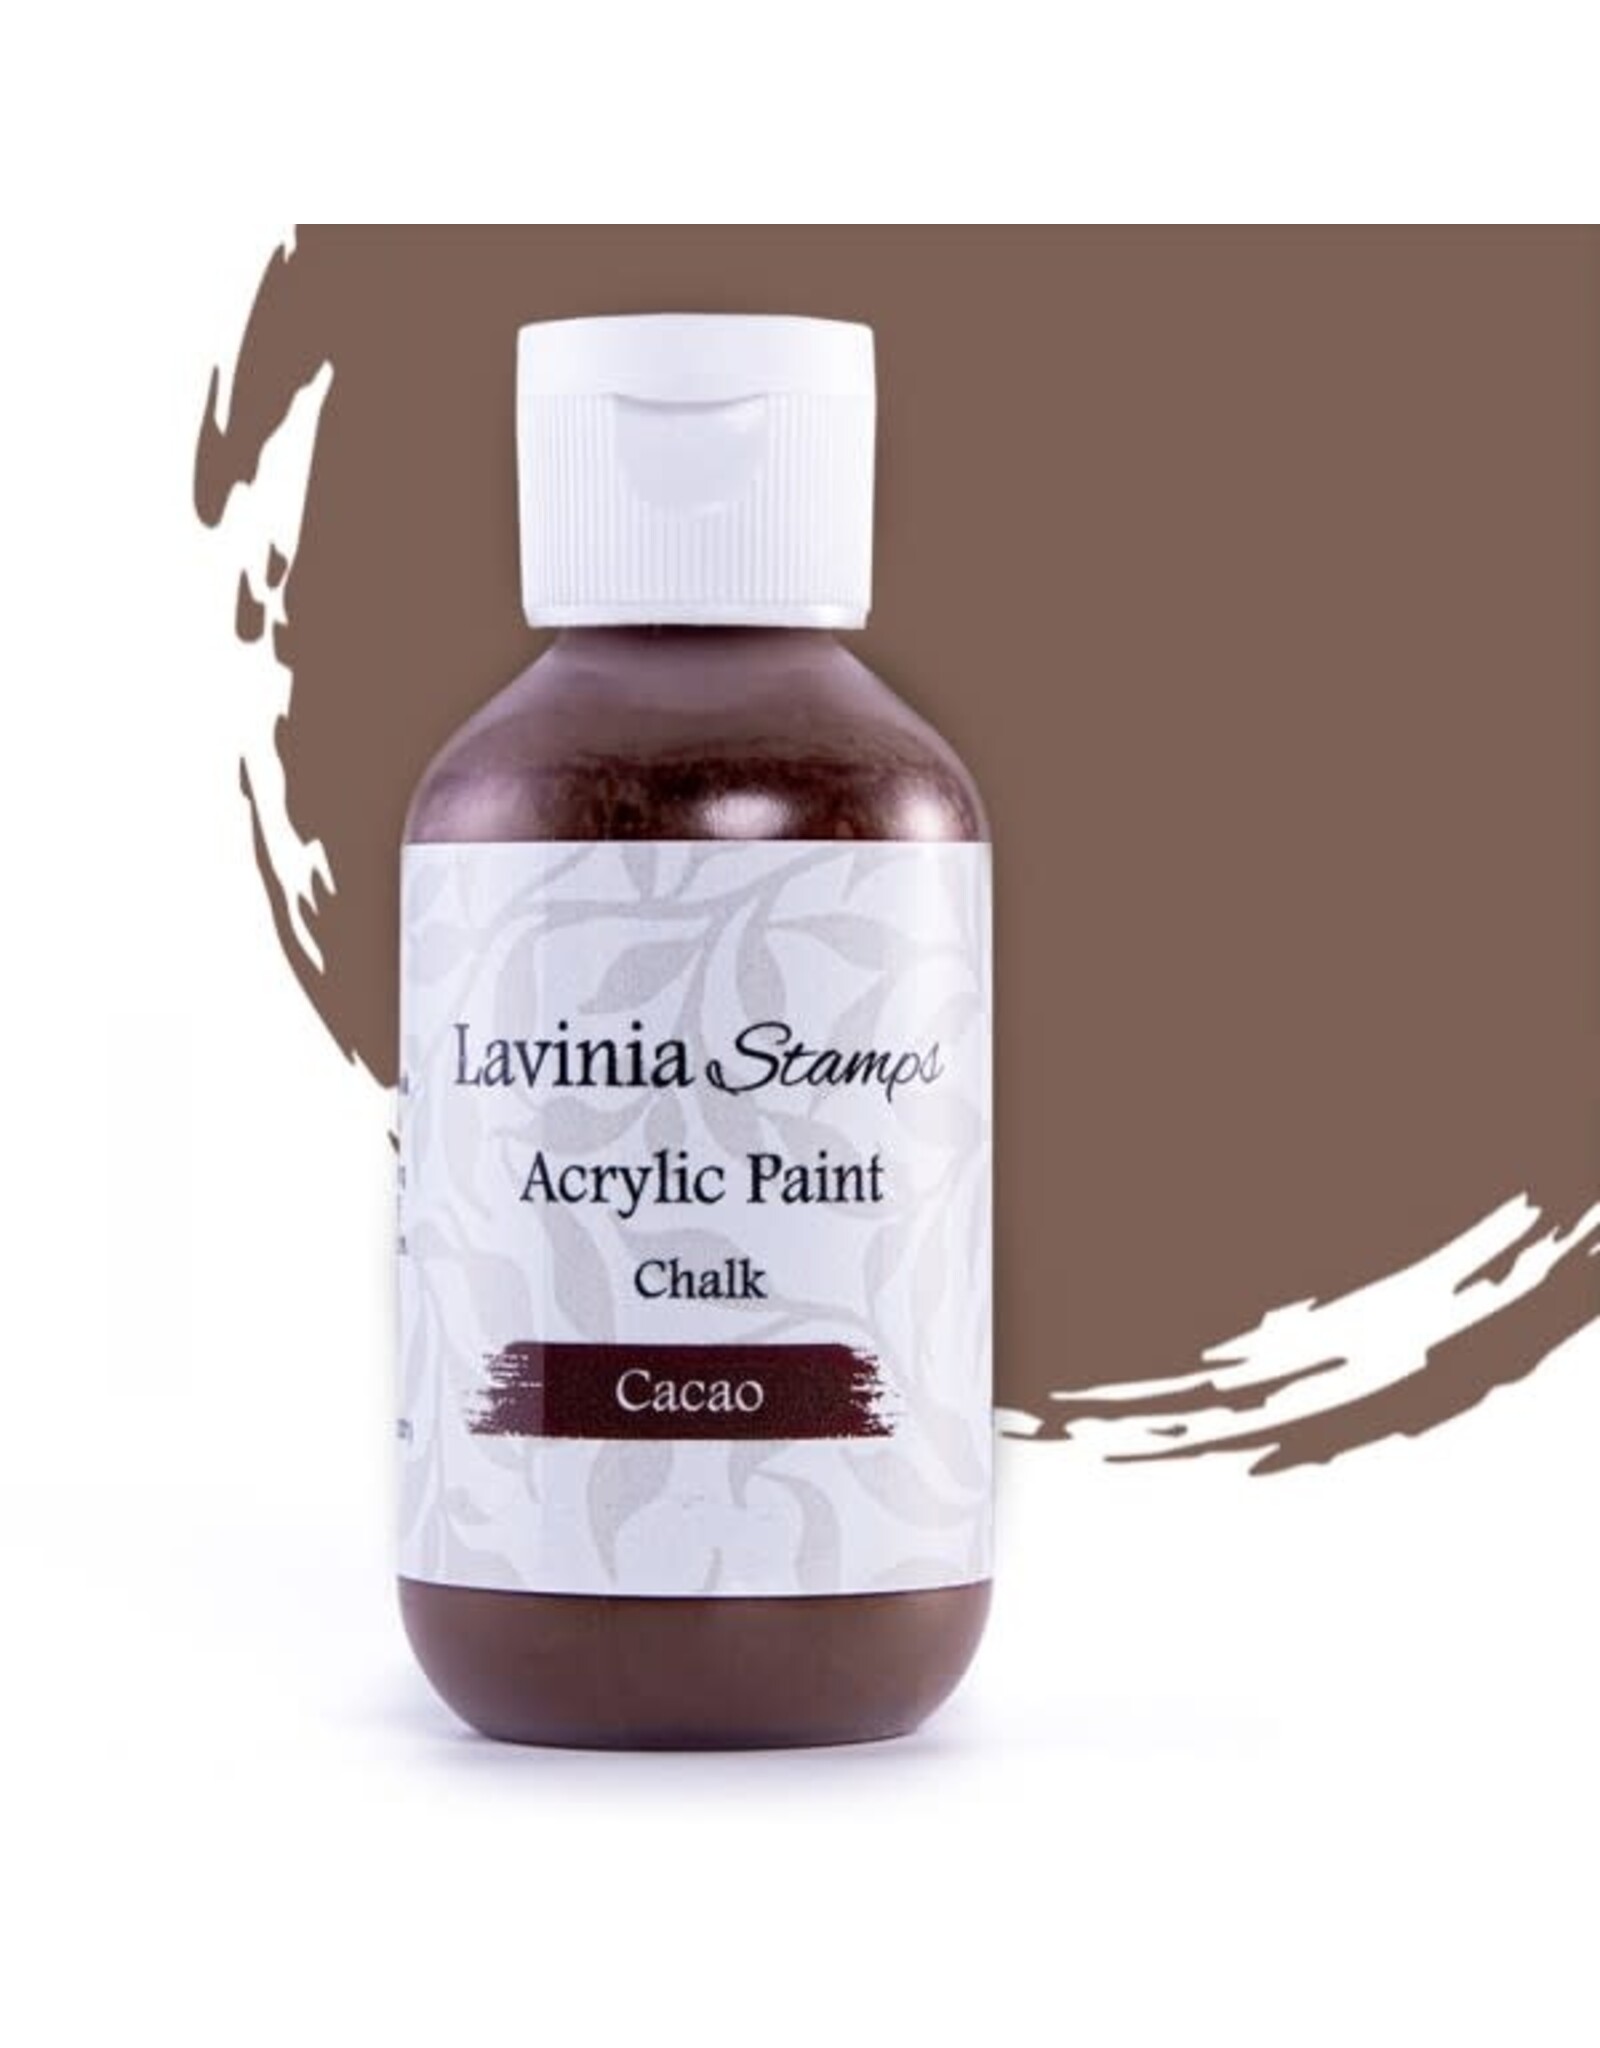 LAVINIA STAMPS LAVINIA STAMPS CHALK ACRYLIC PAINT CACAO